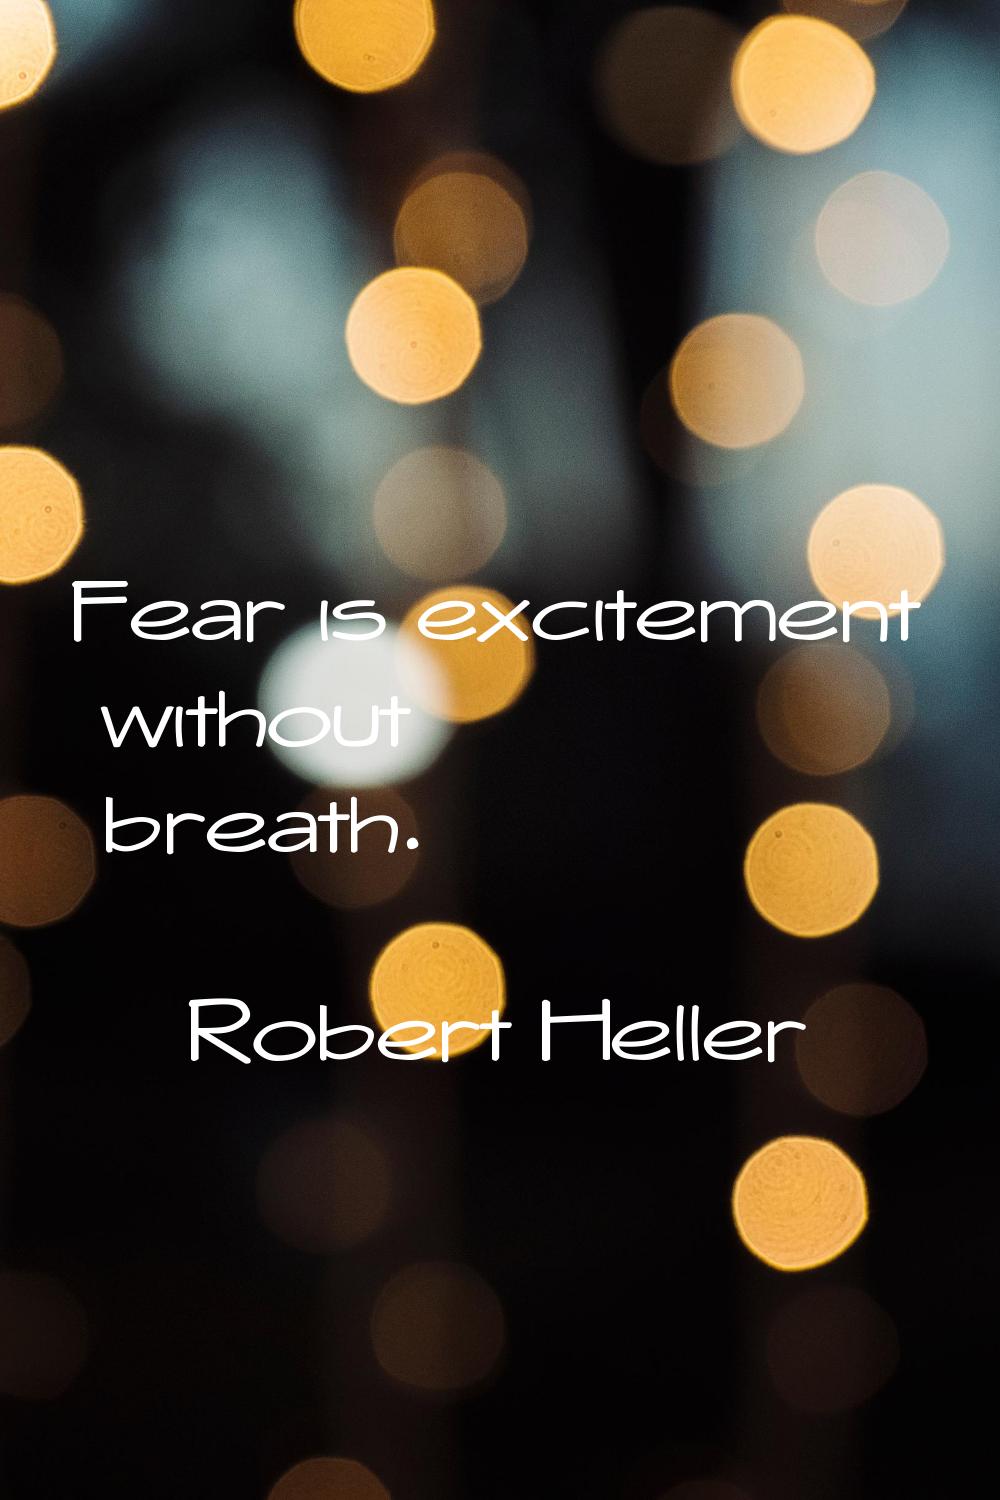 Fear is excitement without breath.